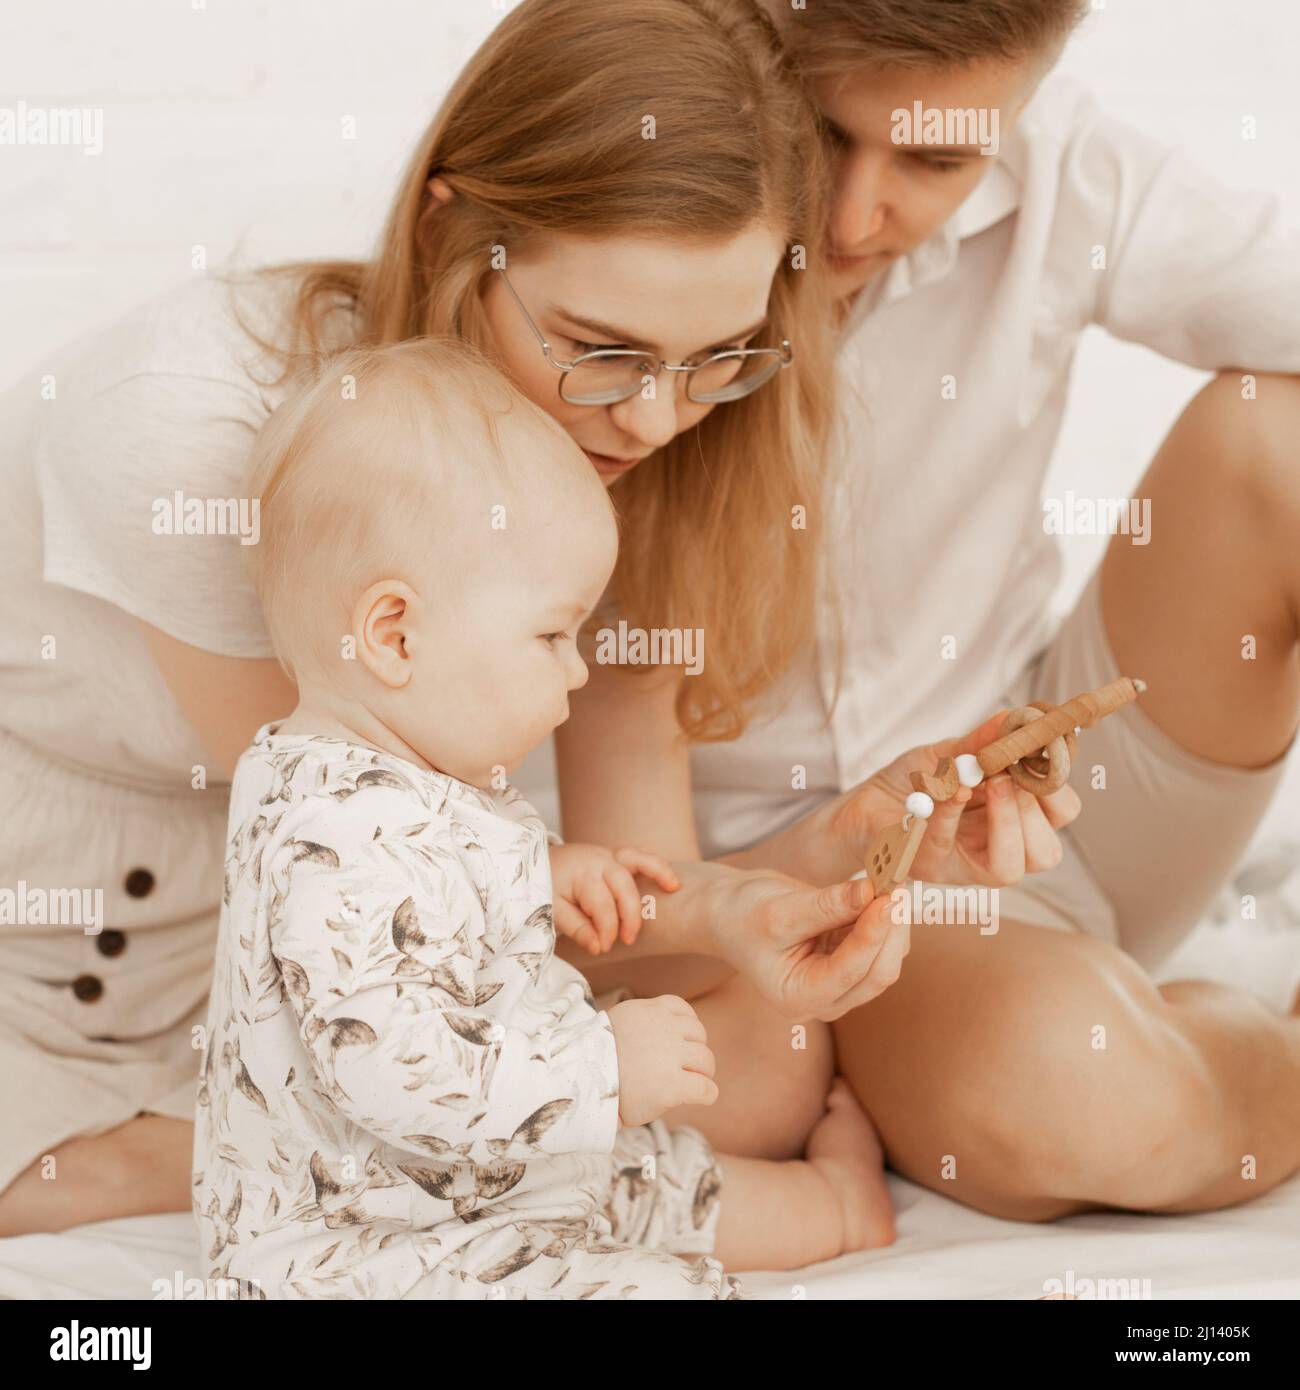 Young family spending time together, mother, father newborn baby. Showing wood toys, delayed psychological development. Stock Photo